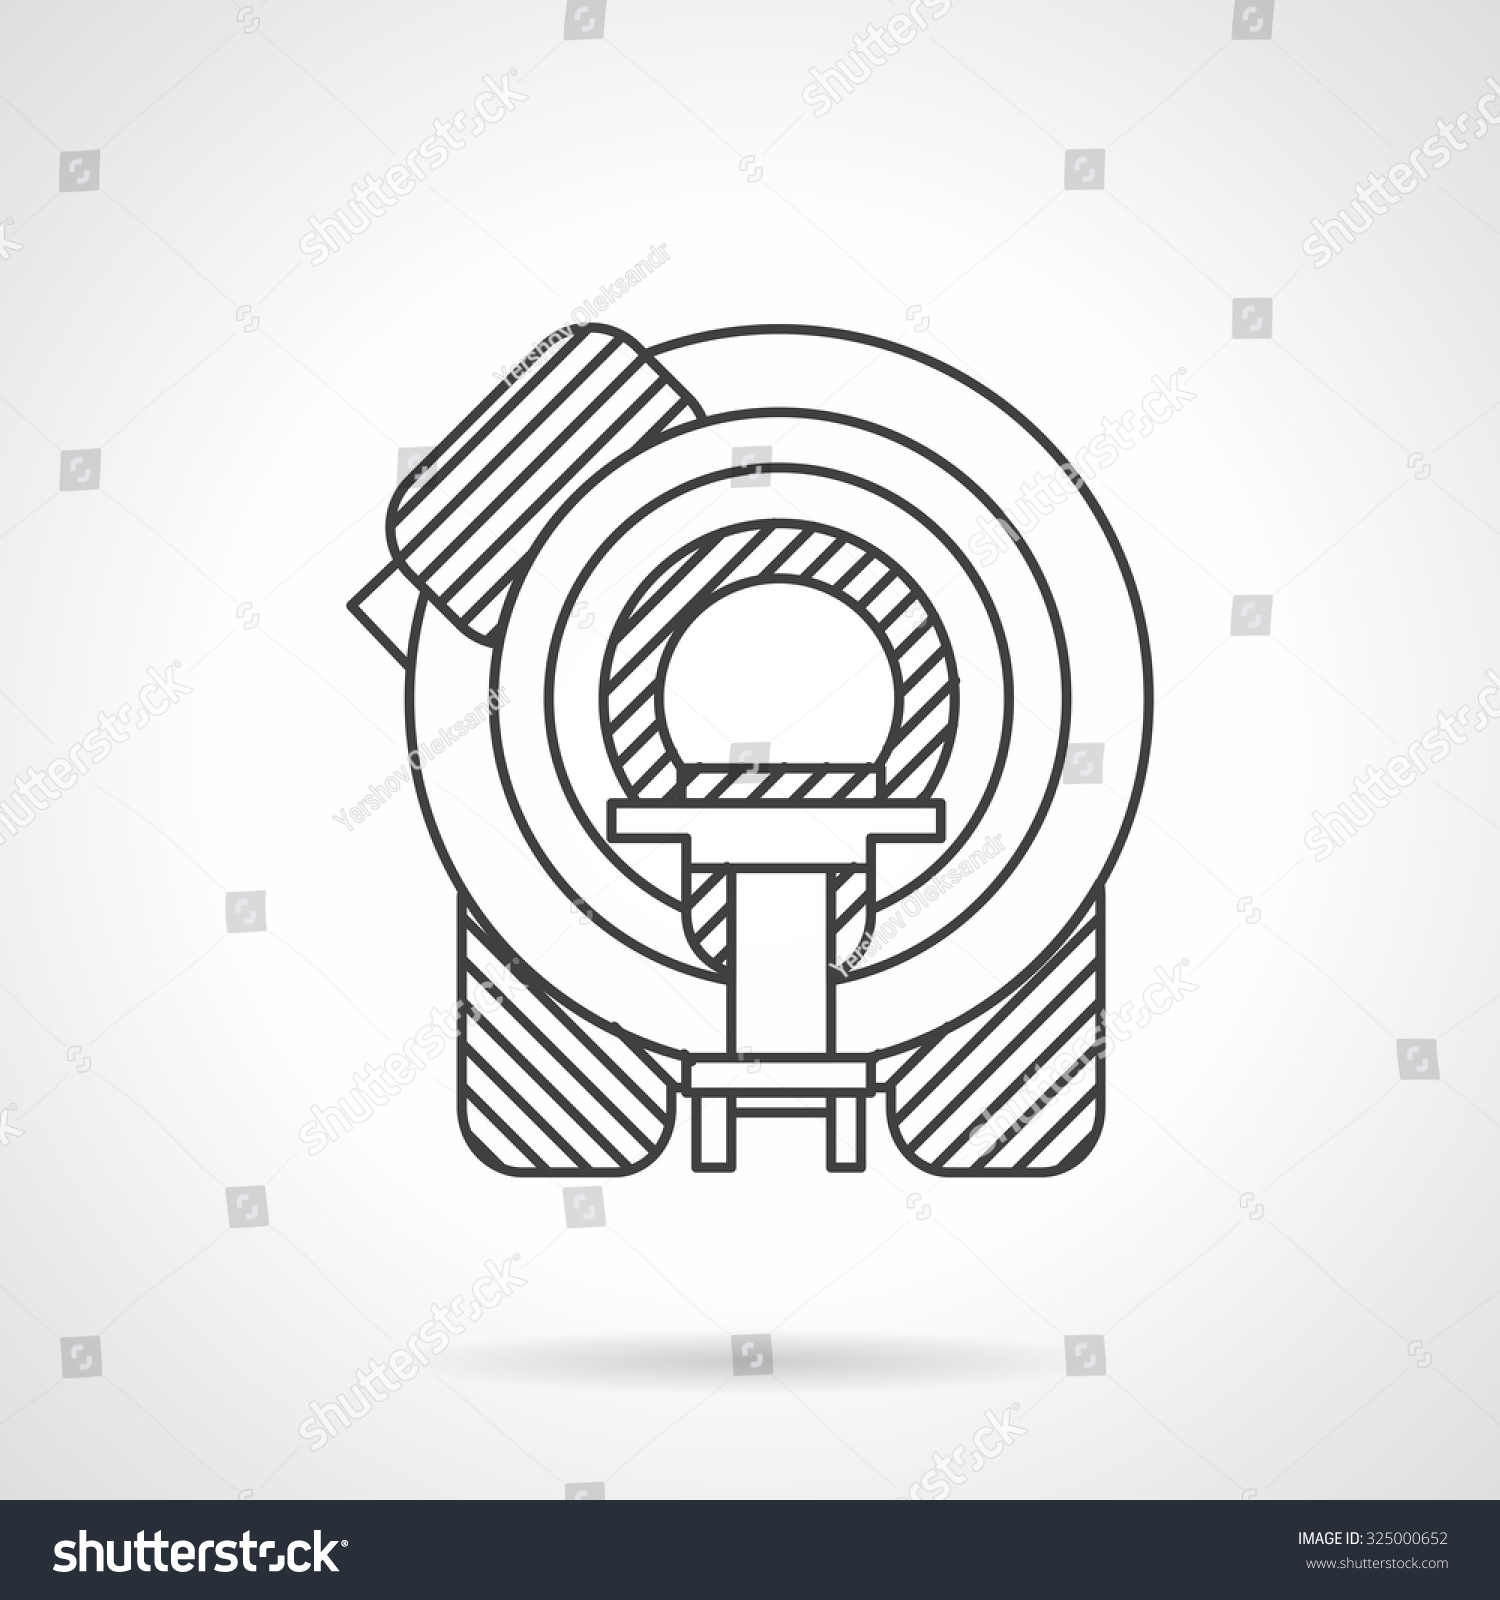 SVG of Machine for magnetic resonance tomography. Flat line style vector icon. Medical diagnosis equipment. Elements of web design for business. svg